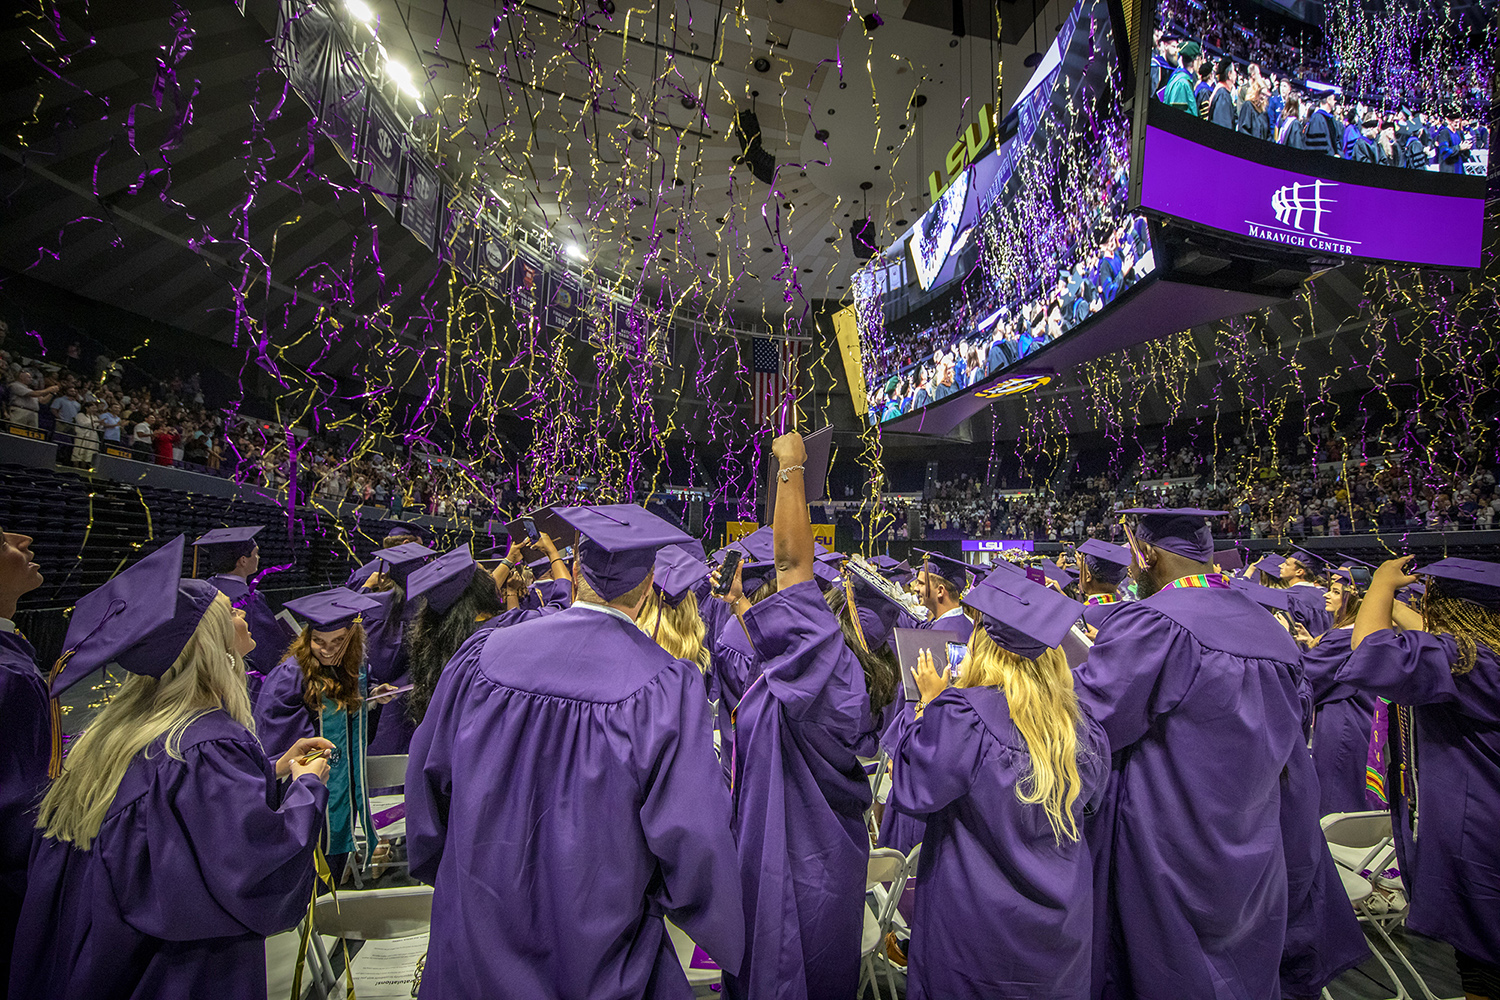 Graduates celebrate amid purple and gold streamers during LSU's summer commencement